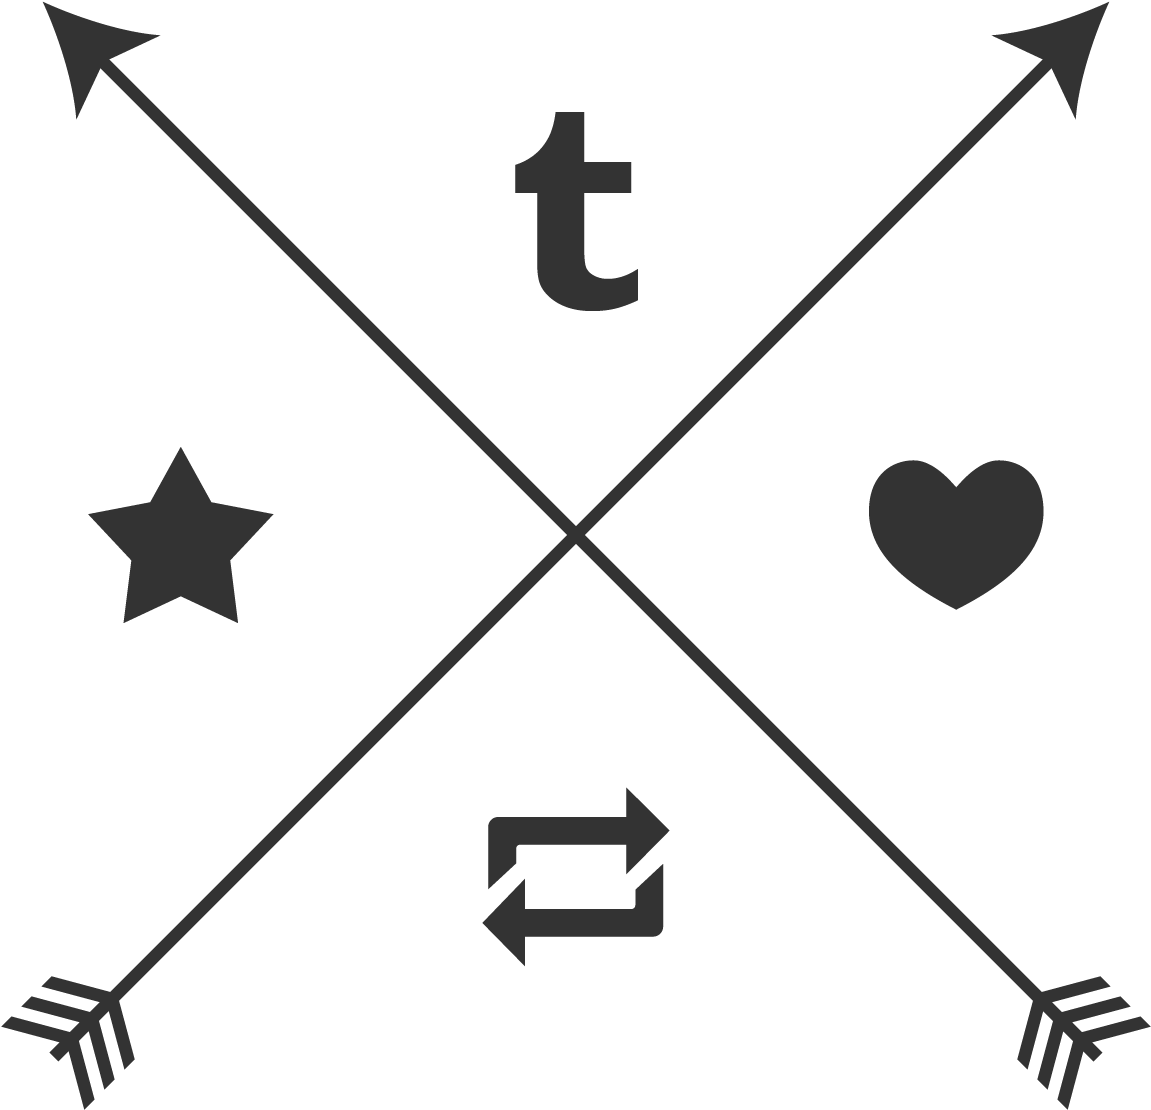 A Black Background With Arrows And Symbols